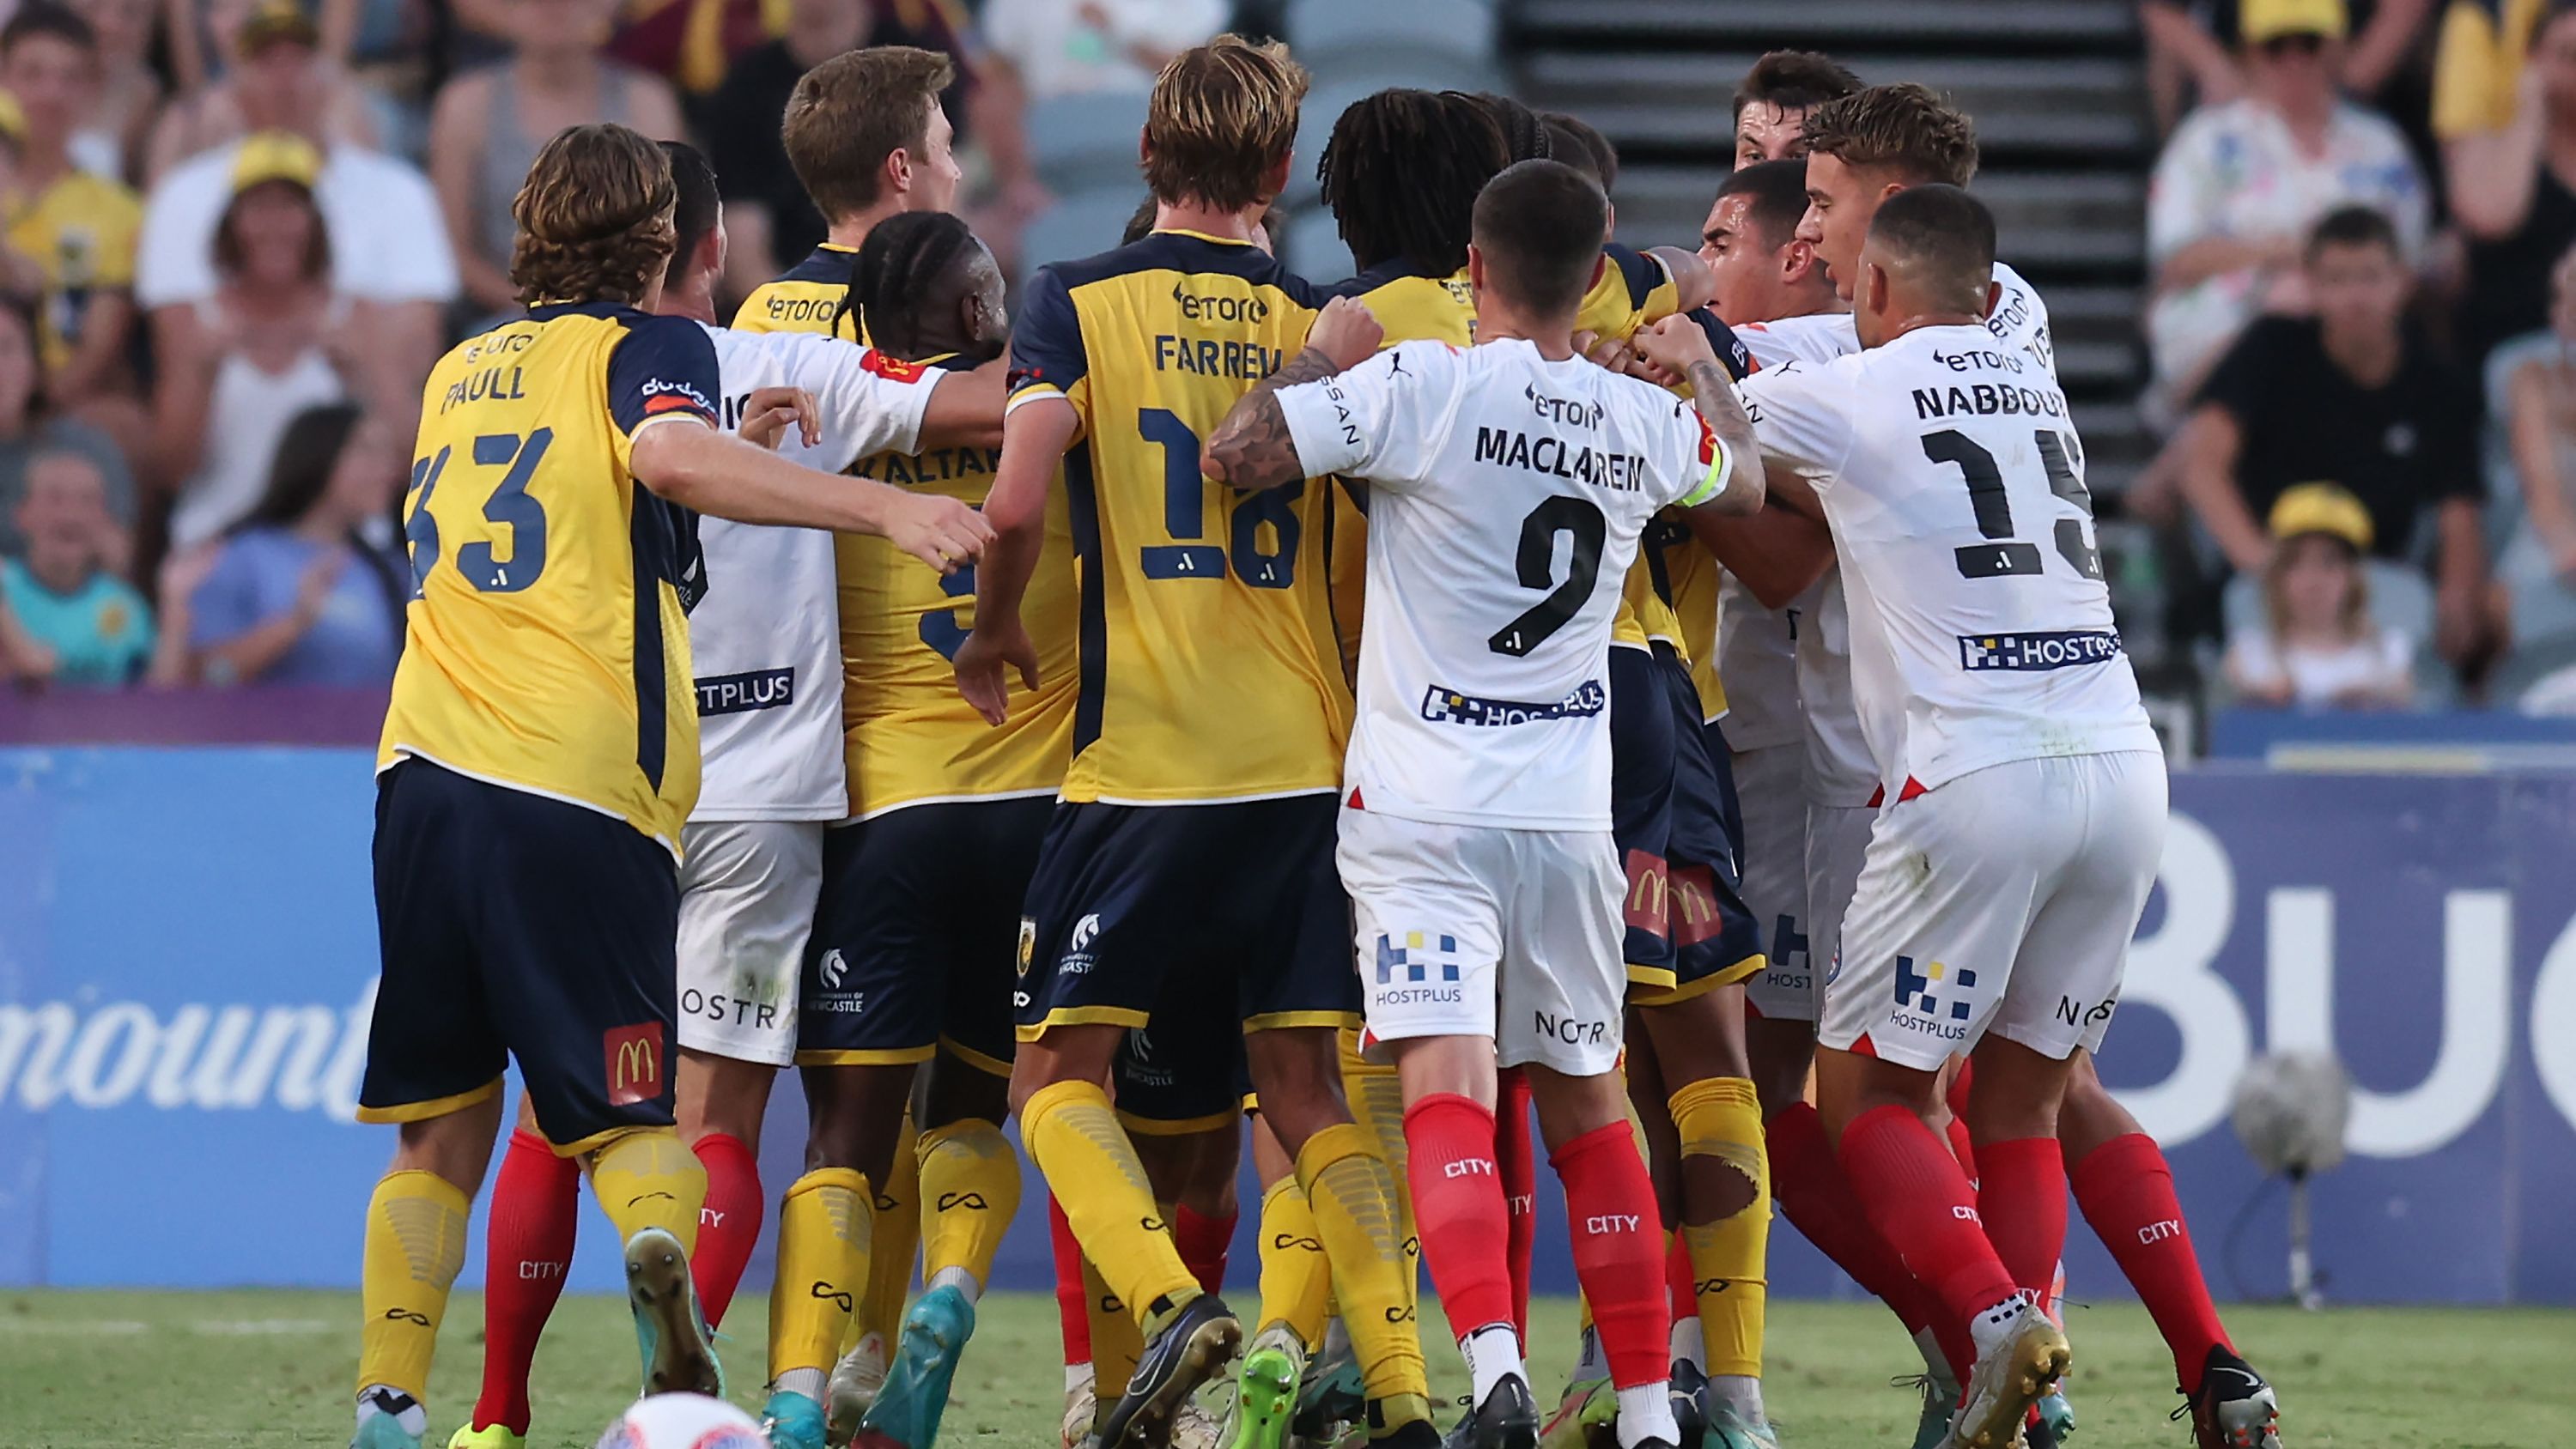 Players tussle during the A-League match between Central Coast Mariners and Melbourne City.